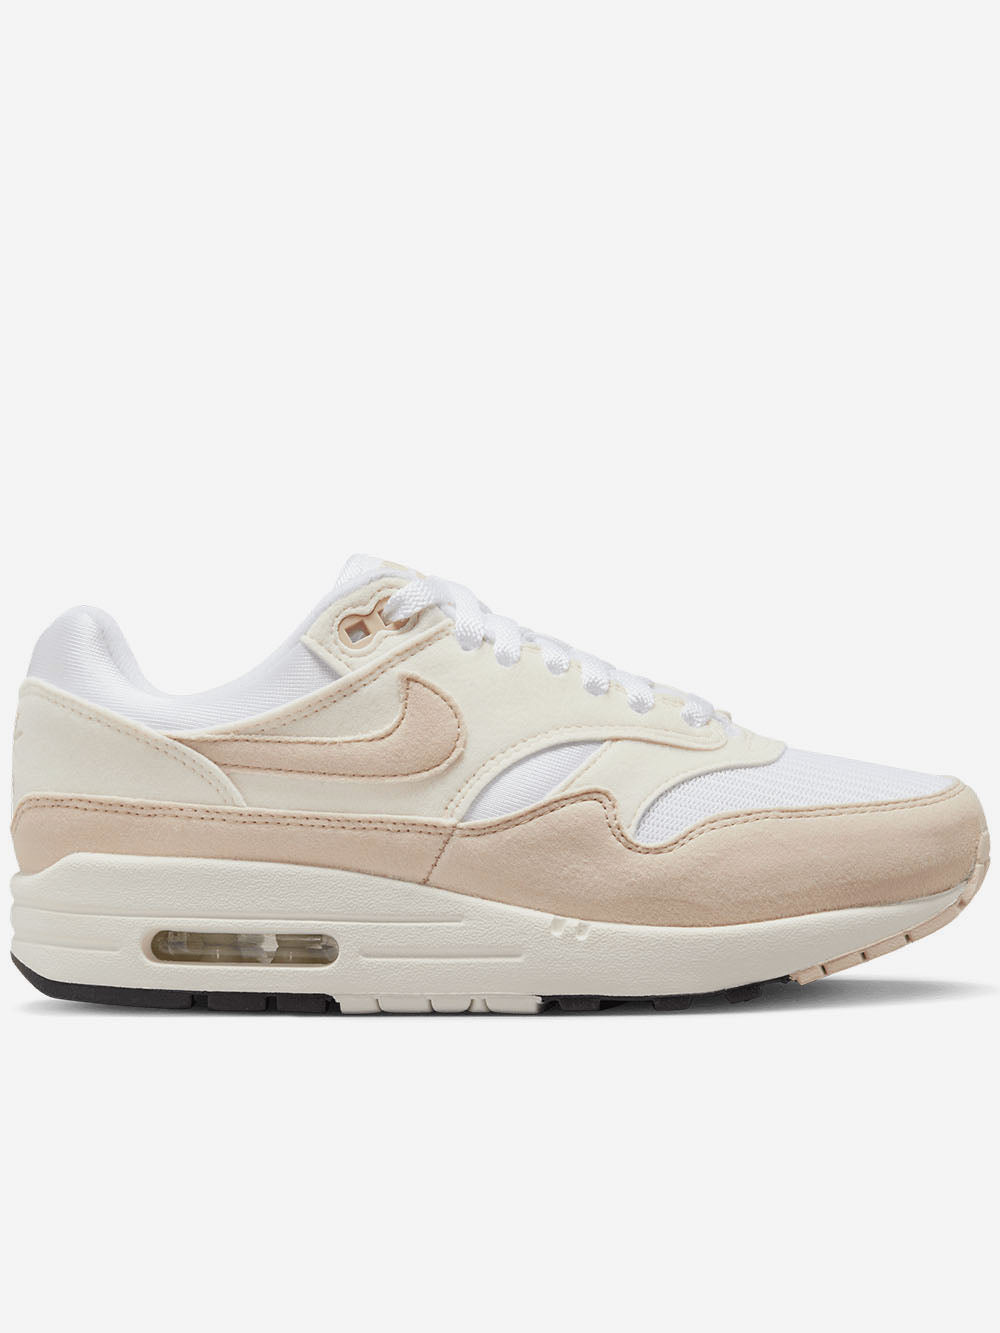 NIKE W Air Max 1 '87 "Pale Ivory" Sneakers Beige Urbanstaroma